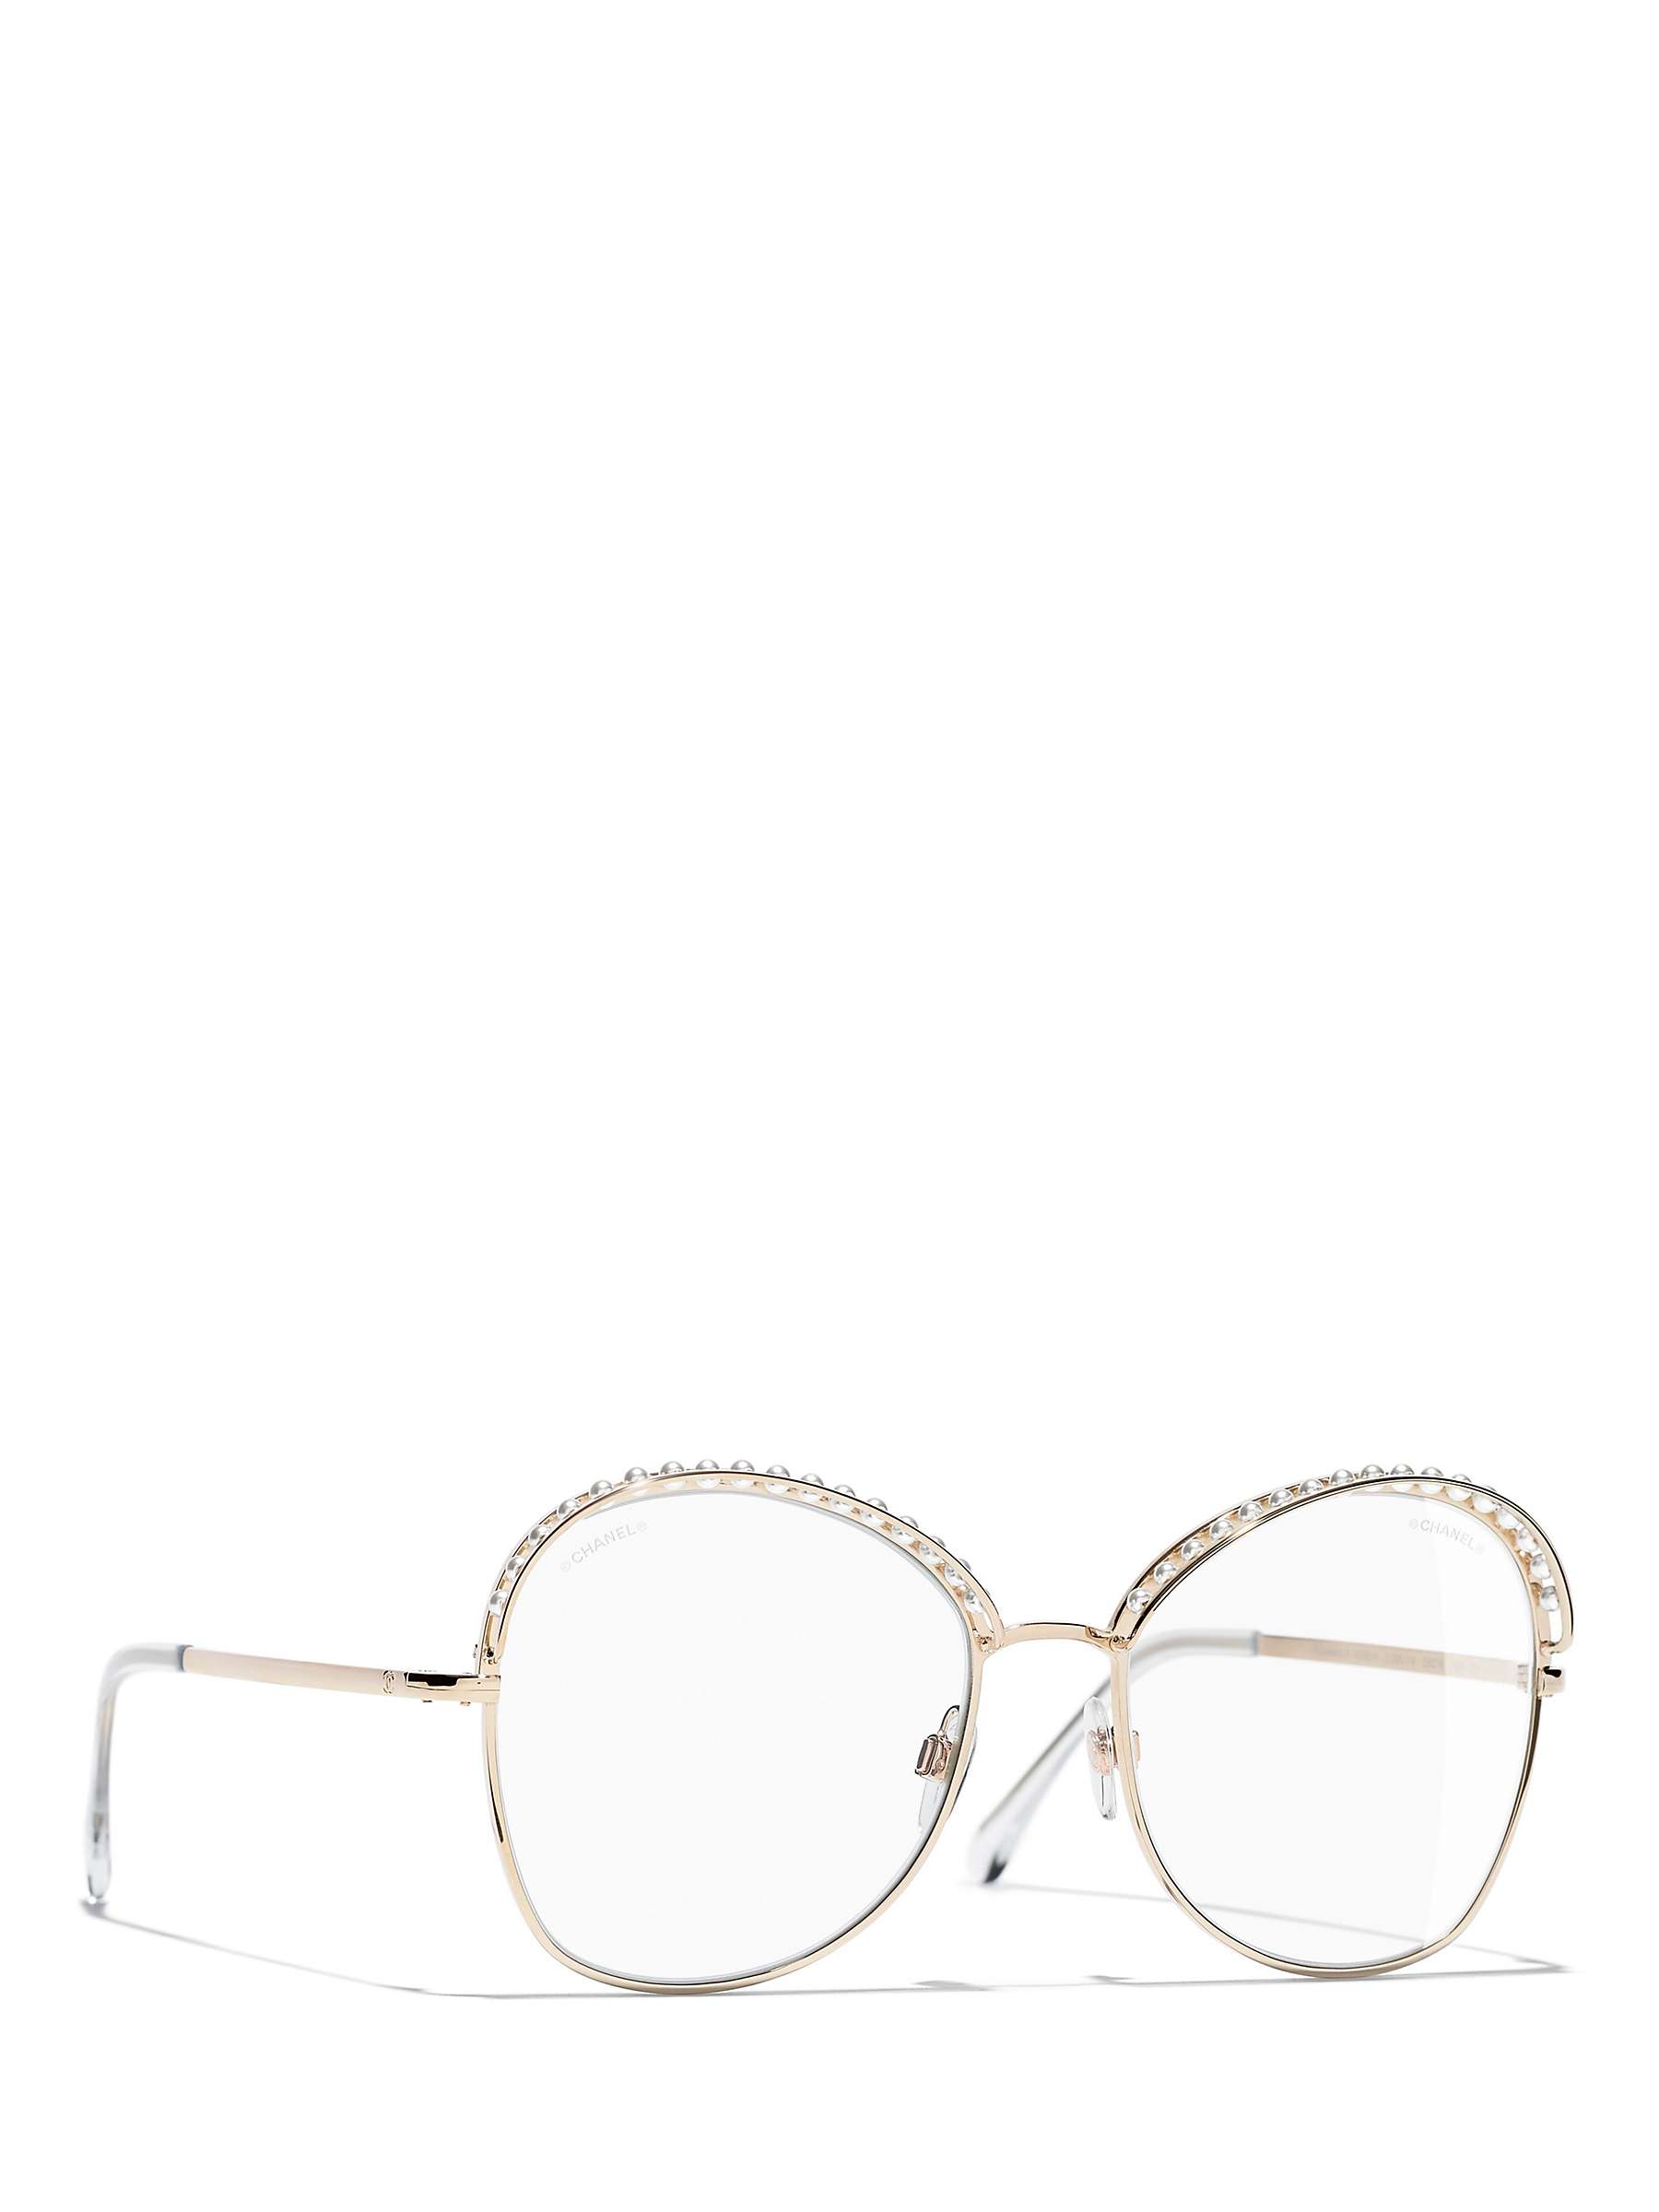 CHANEL Round Sunglasses CH4246H Gold/Clear at John Lewis & Partners